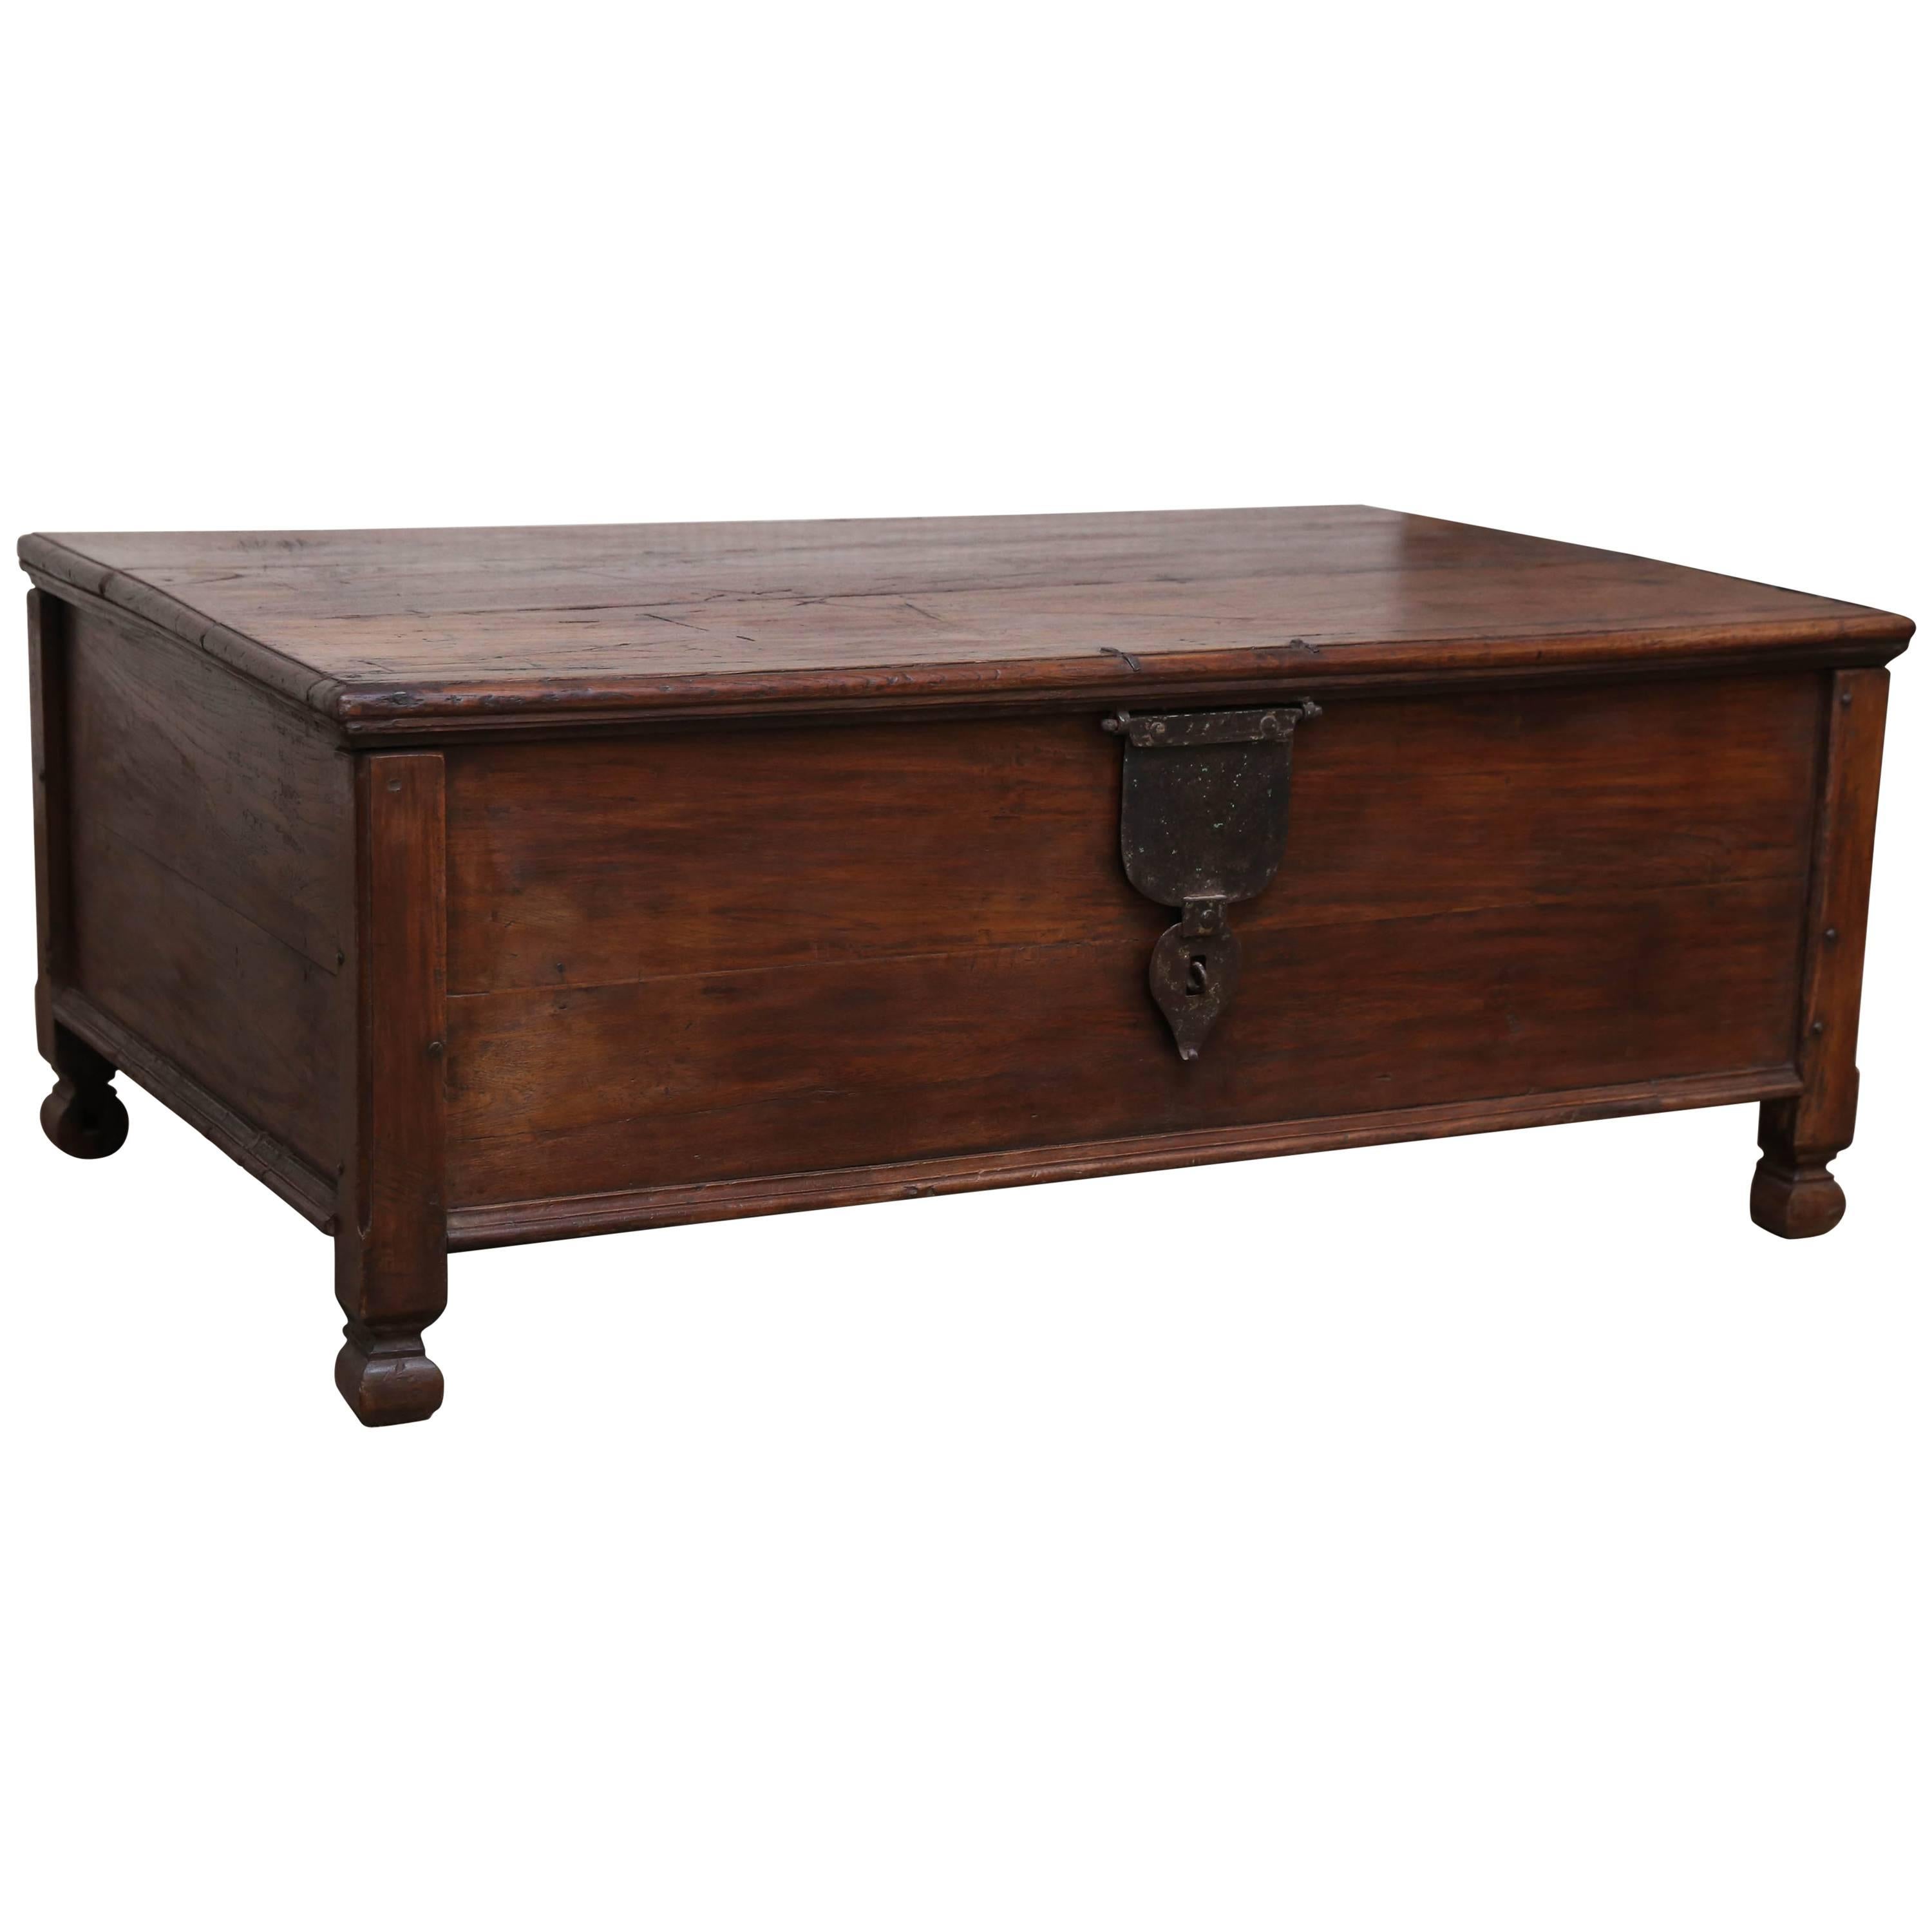 Large Teak Wood Early 19th Century Dowry Chest on Four Wooden Wheels For Sale